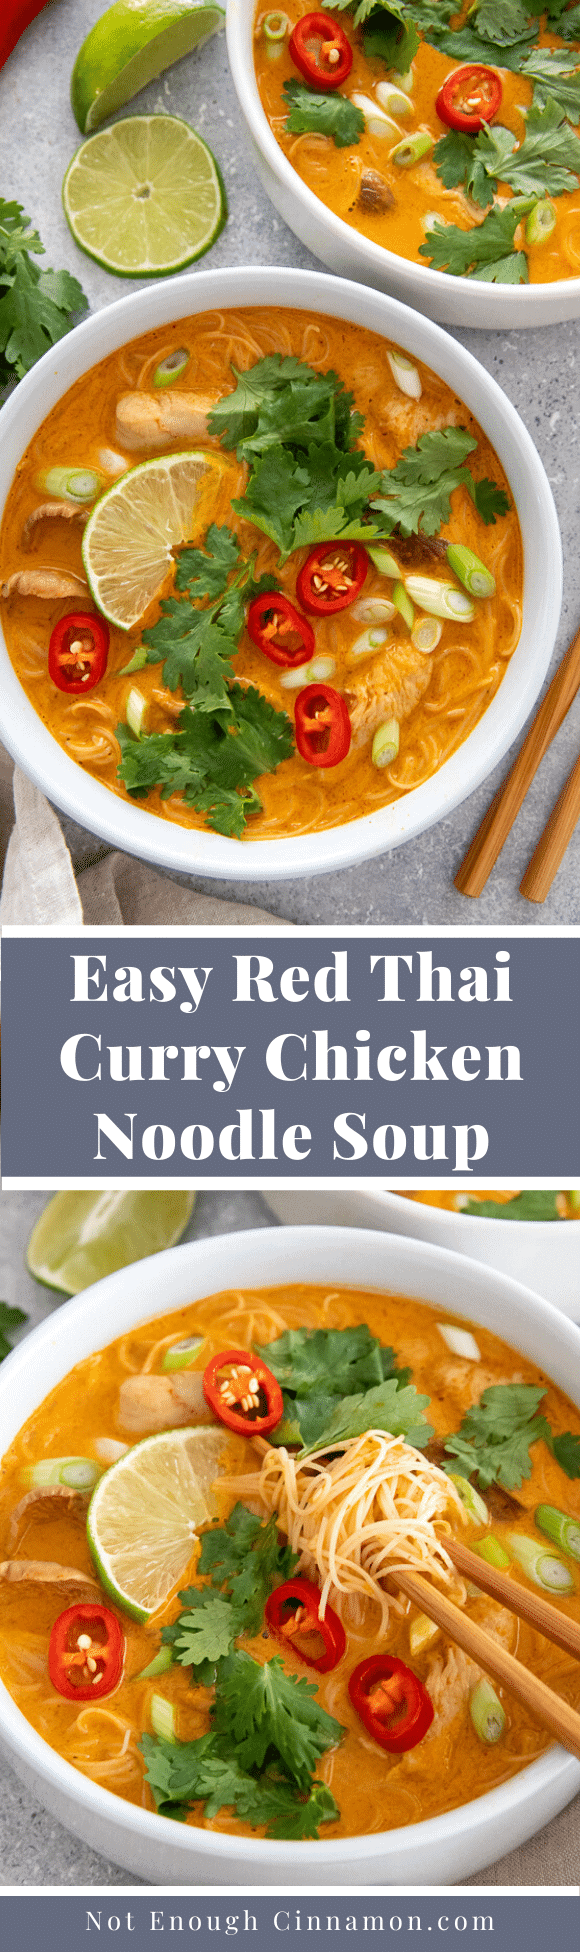 Red Thai Curry Chicken Noodle Soup - Yummy Recipe